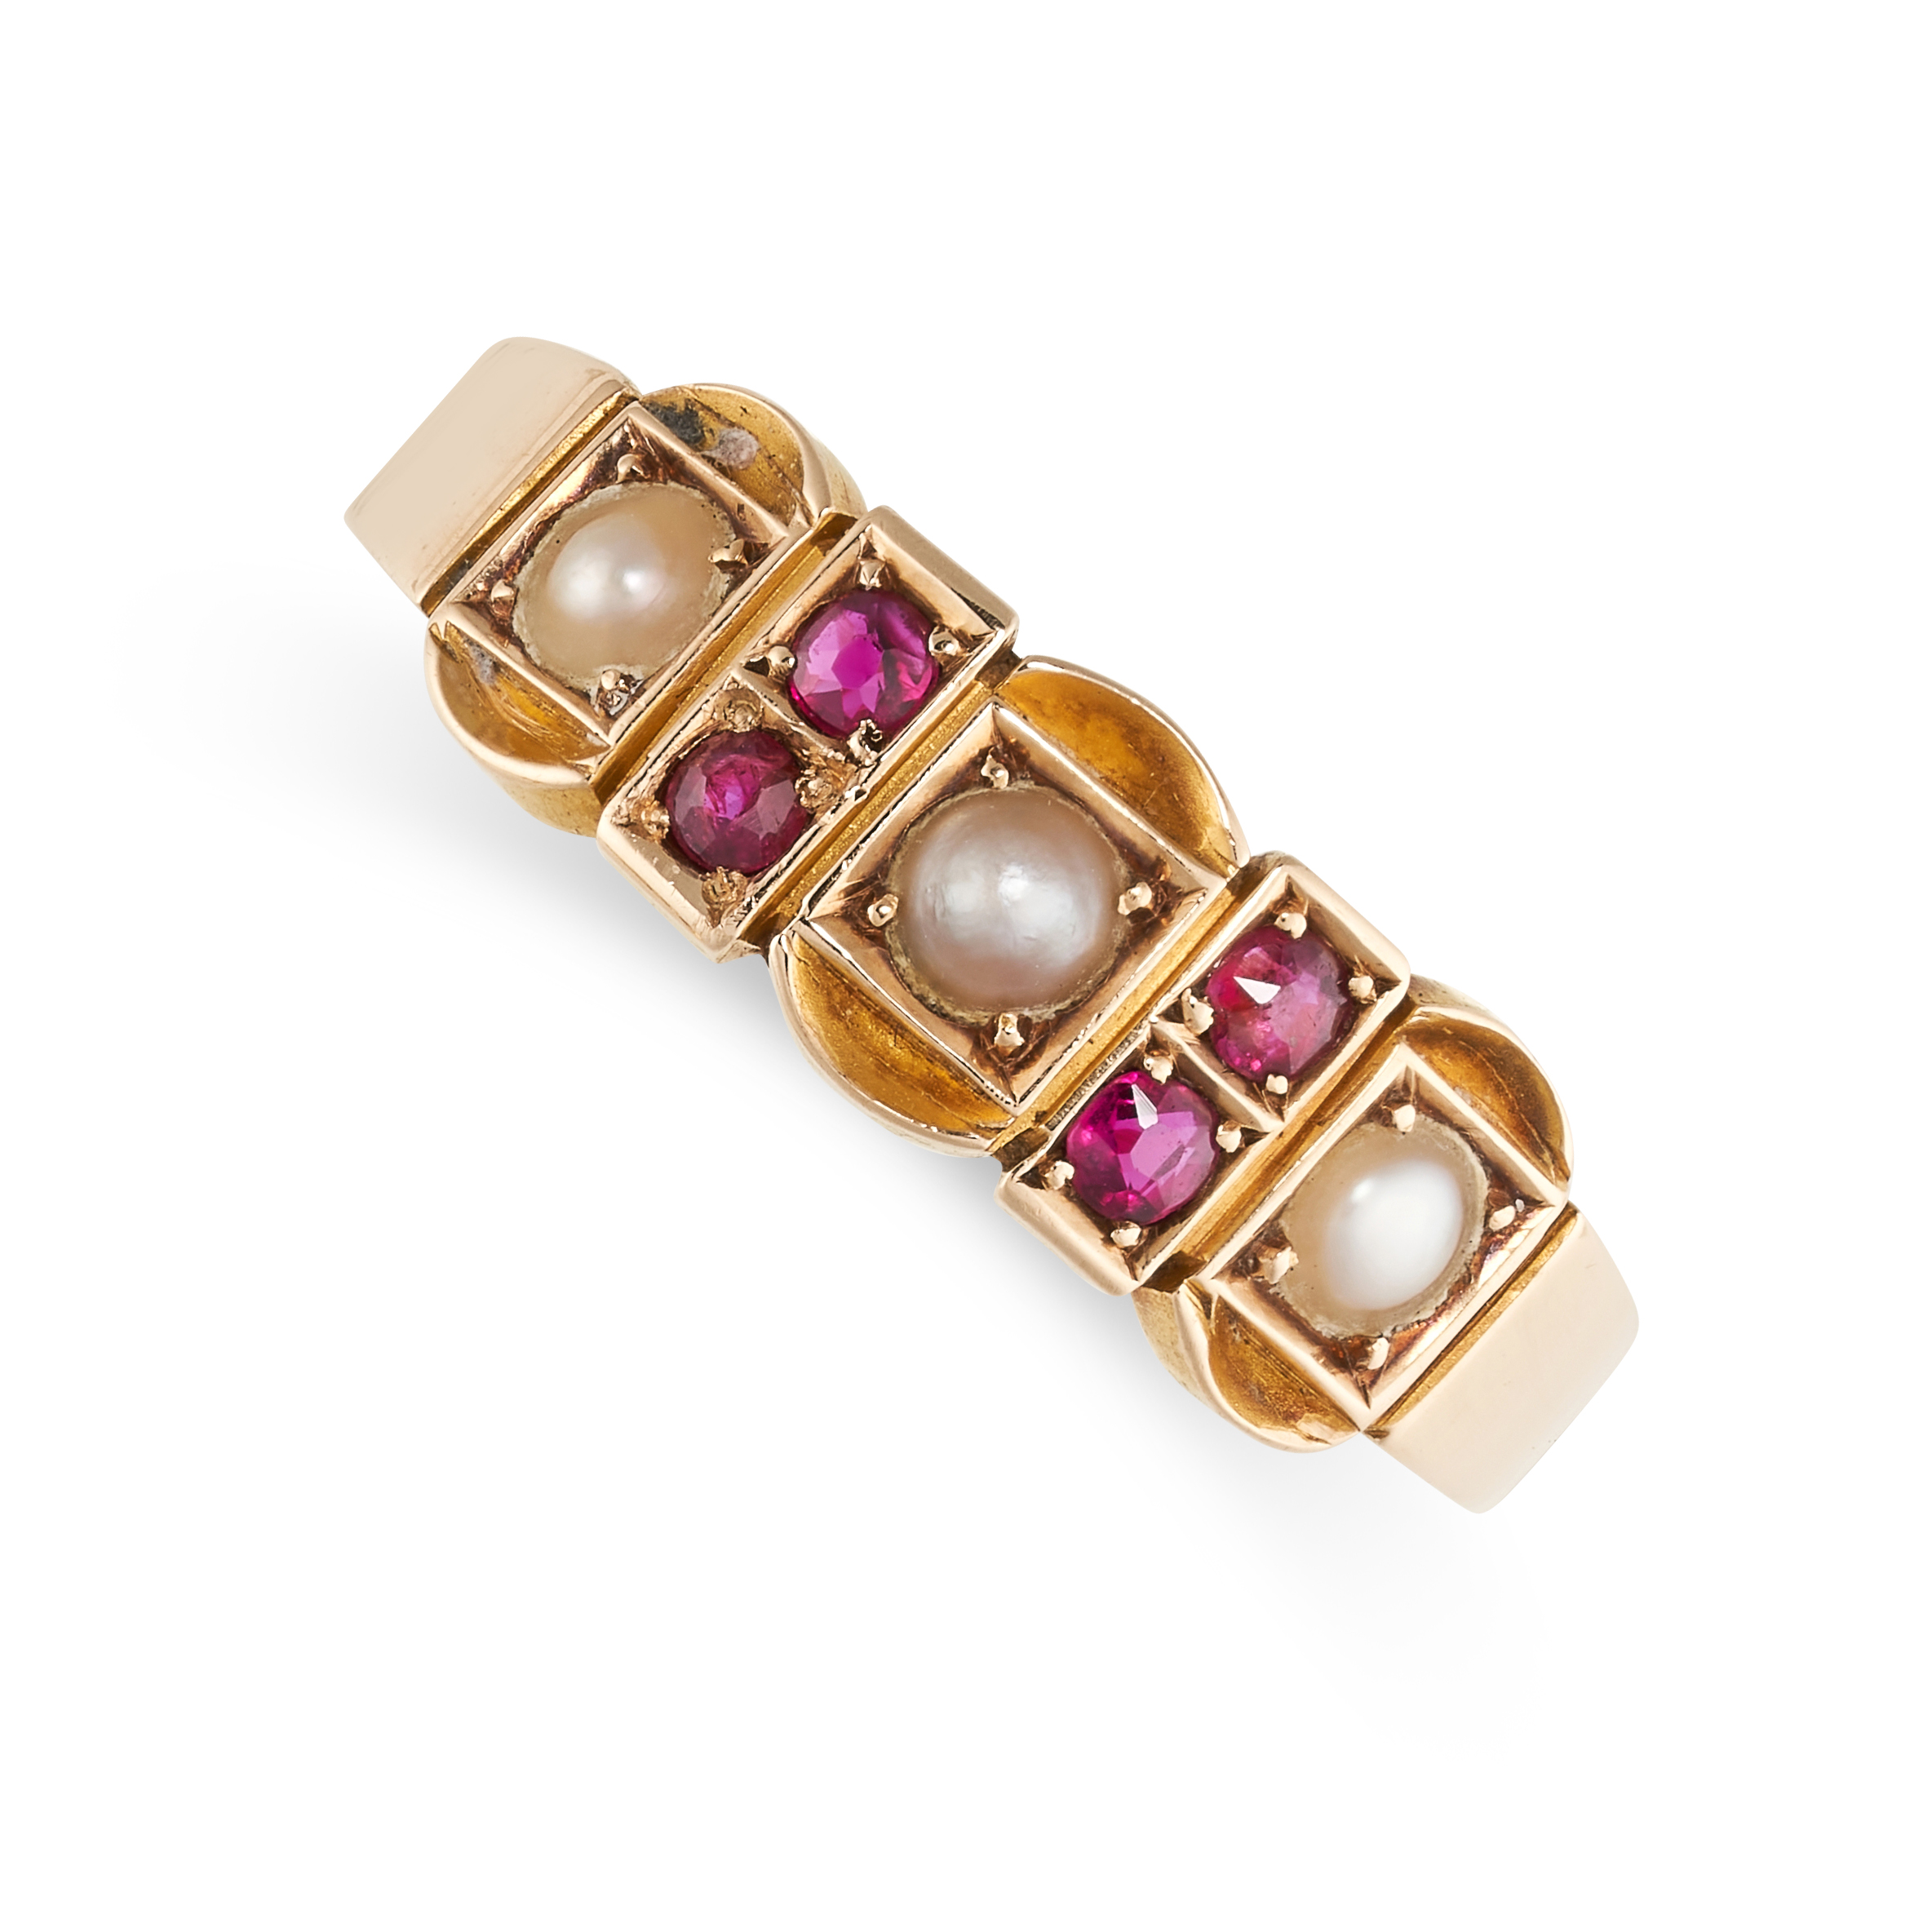 NO RESERVE - AN ANTIQUE VICTORIAN RUBY AND PEARL RING, 1893 in 15ct yellow gold, the band set with a